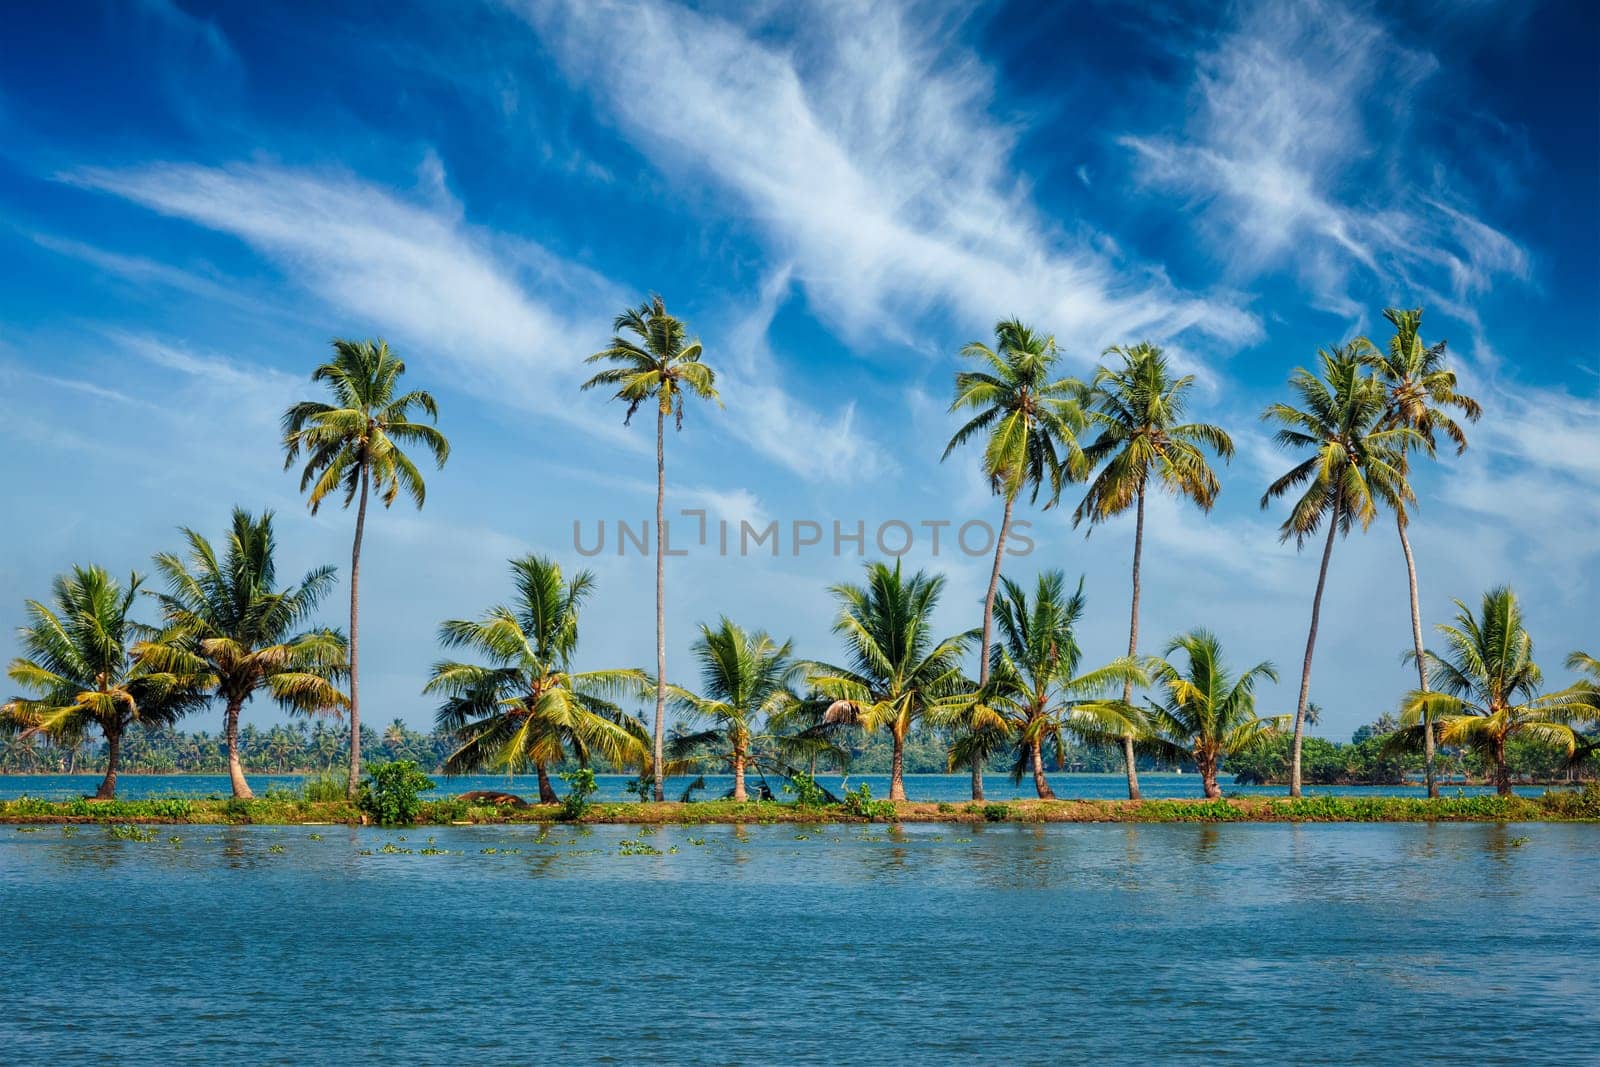 Kerala travel tourism background - Palms at Kerala backwaters. Allepey Alappuzha, Kerala, India. This is very typical image of backwaters.